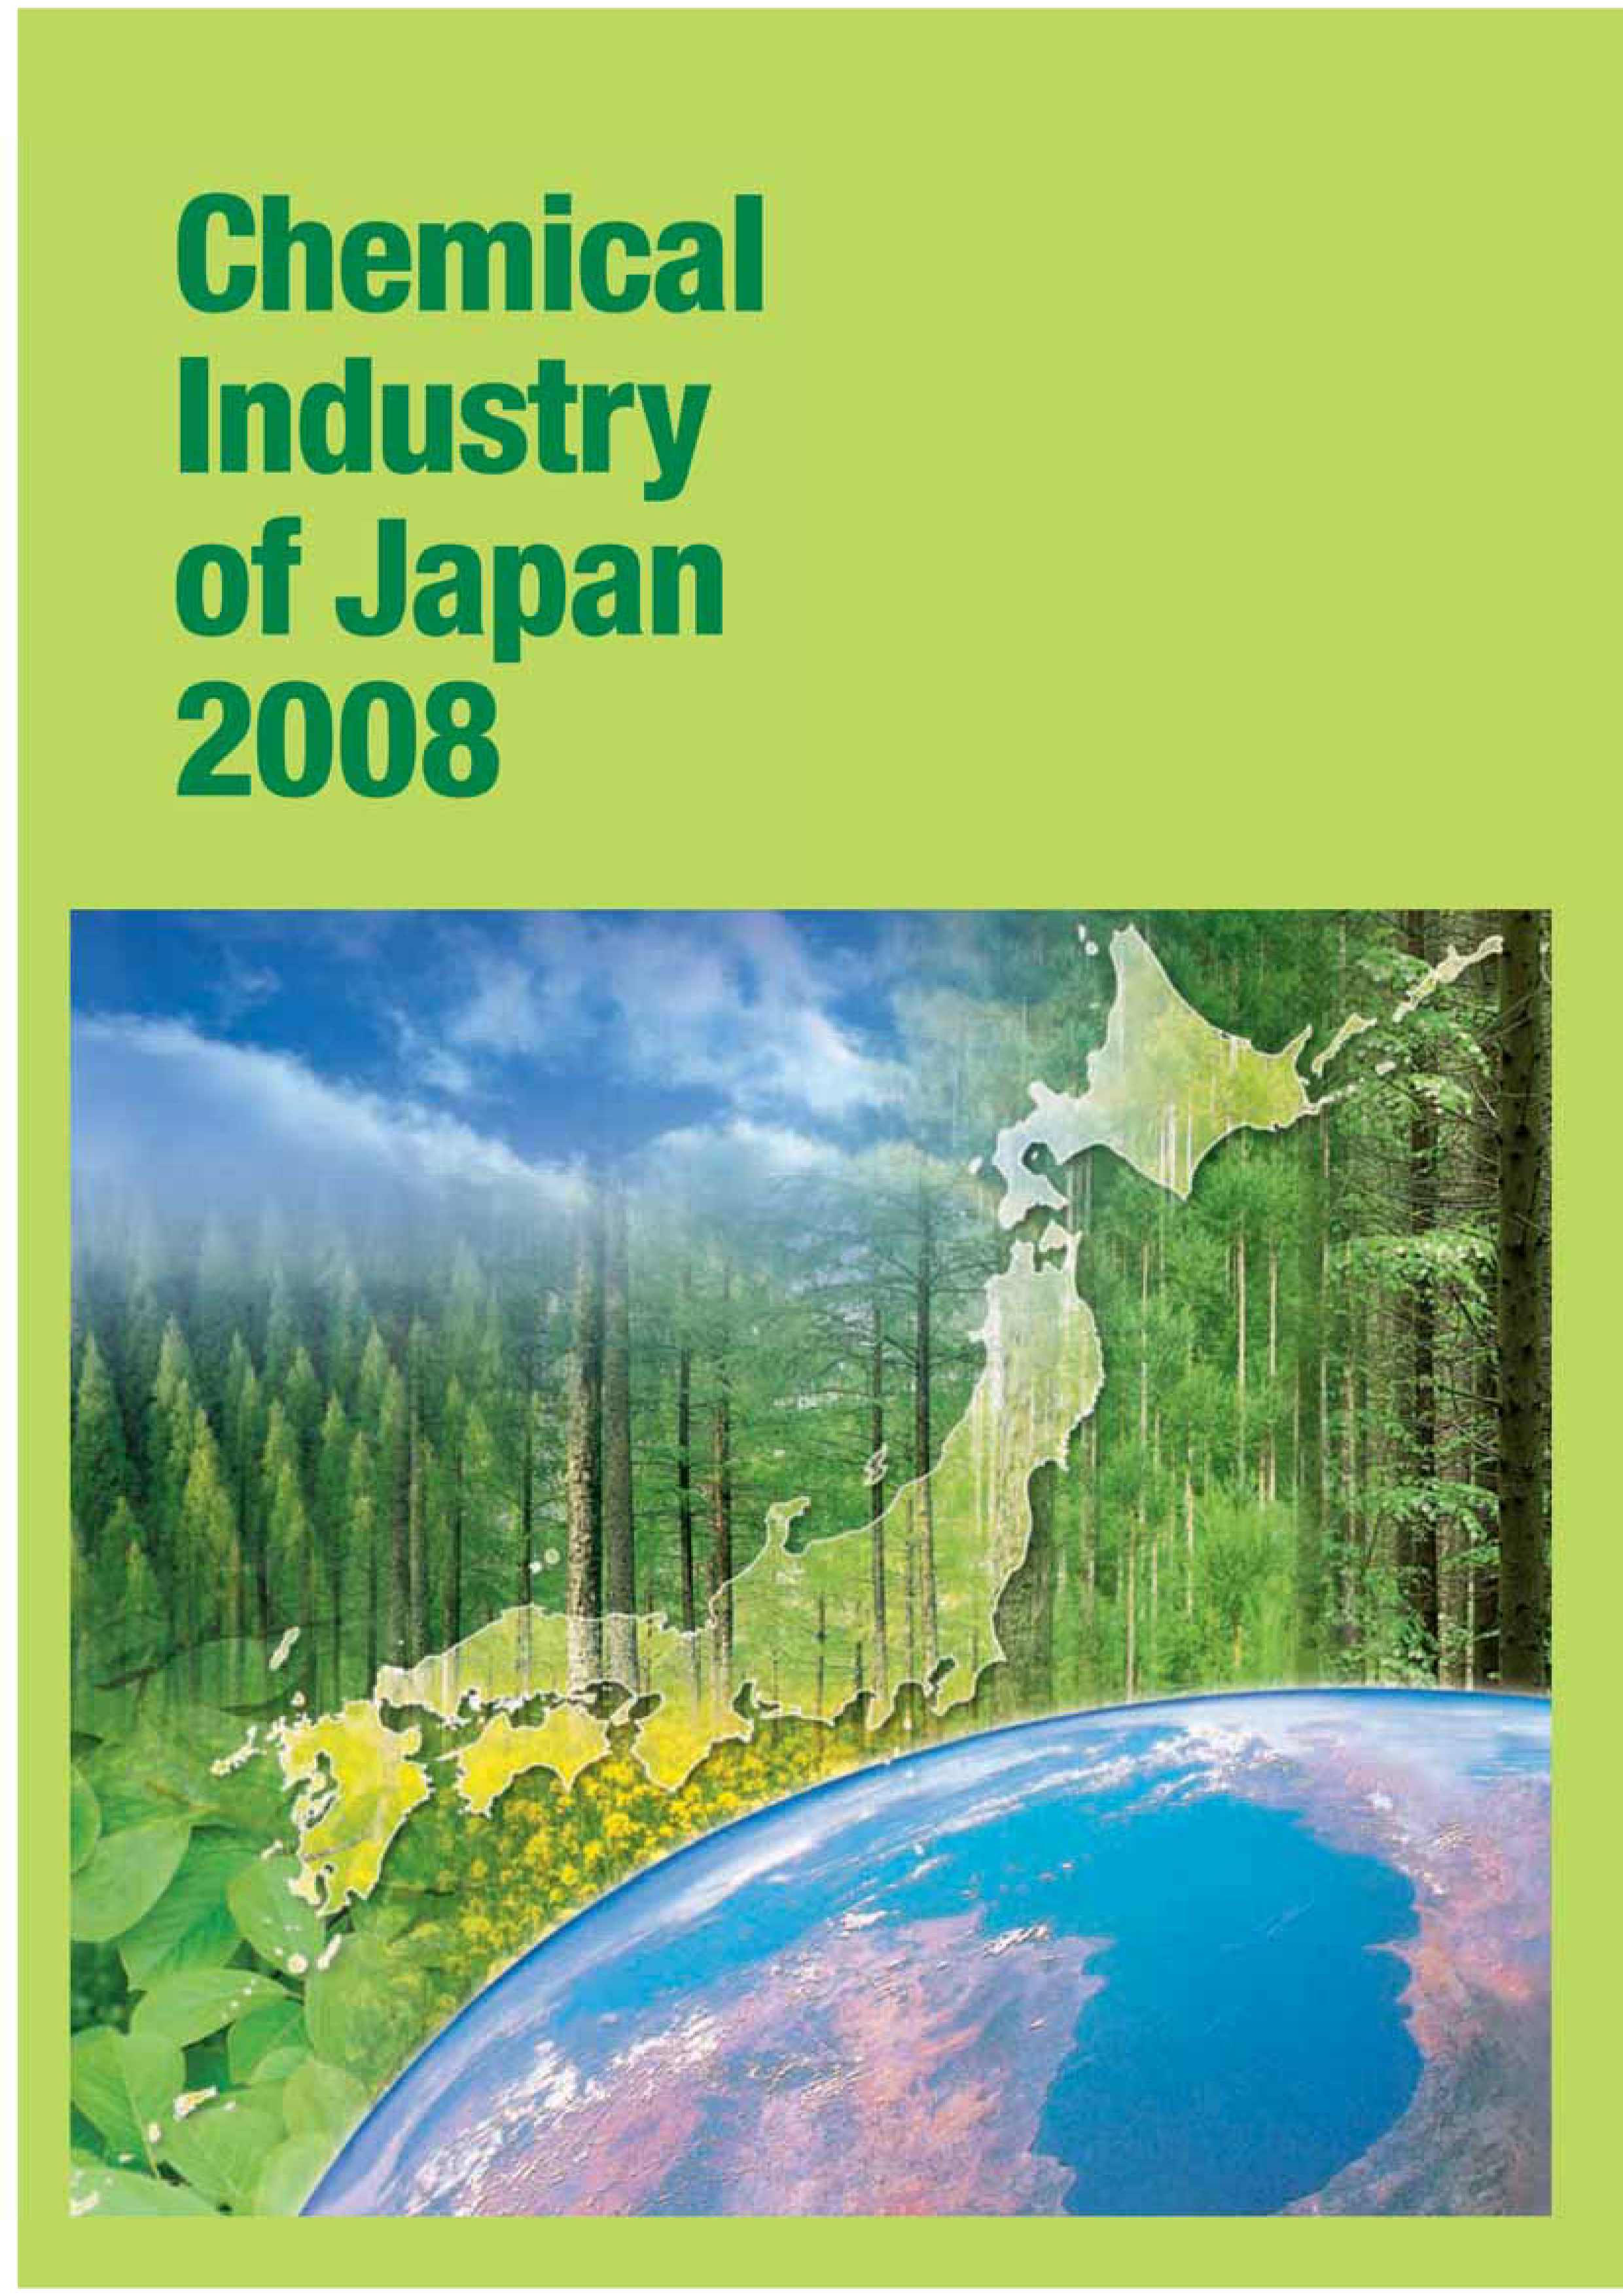 2008 CHEMICAL INDUSTRY OF JAPAN IN GRAPHS